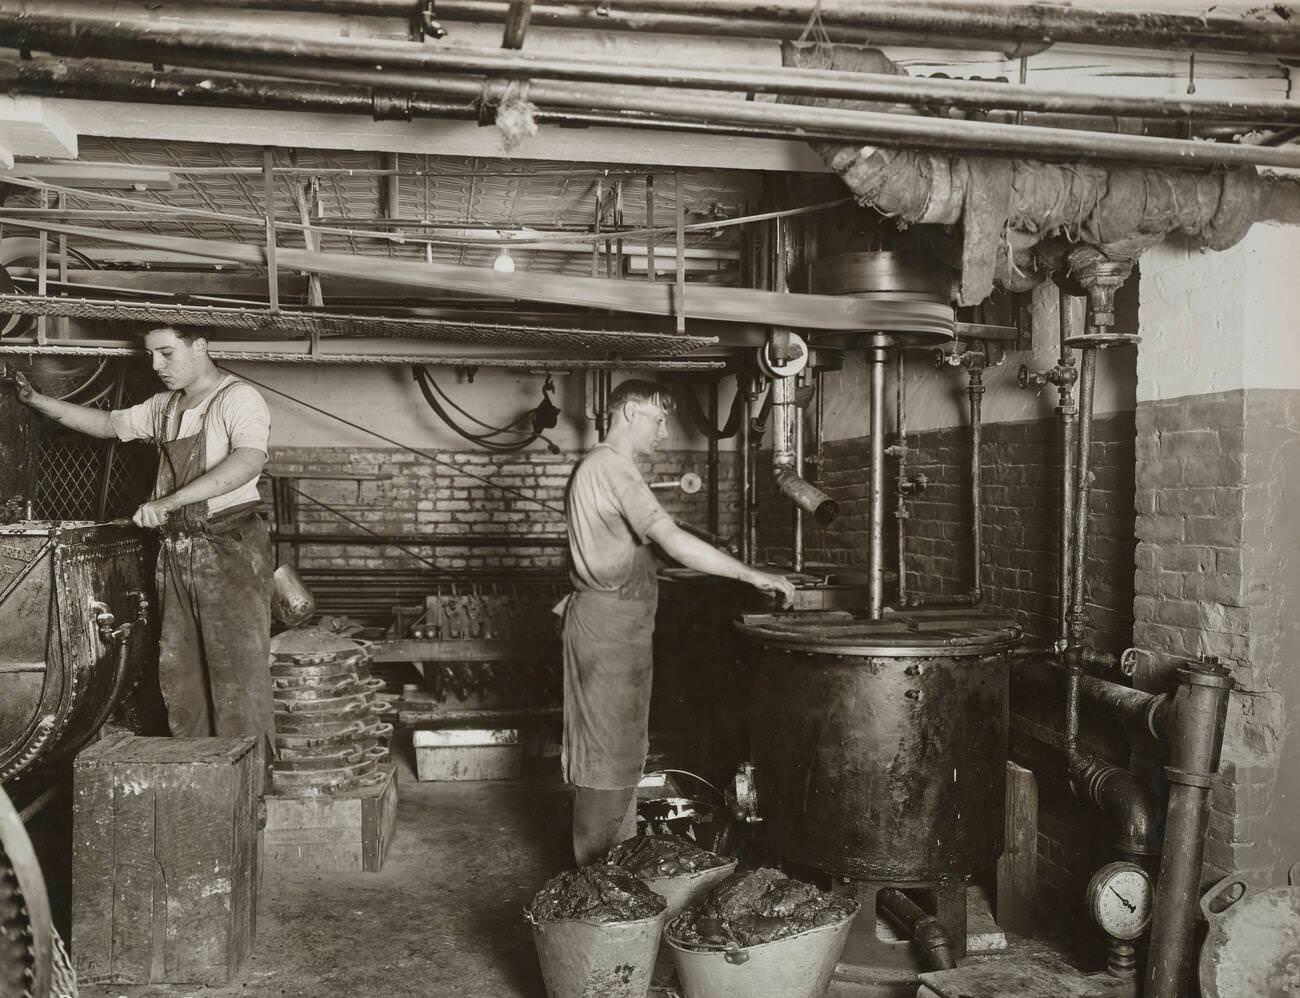 Cocoa Manufacturing At Dean Street, Brooklyn, 1918